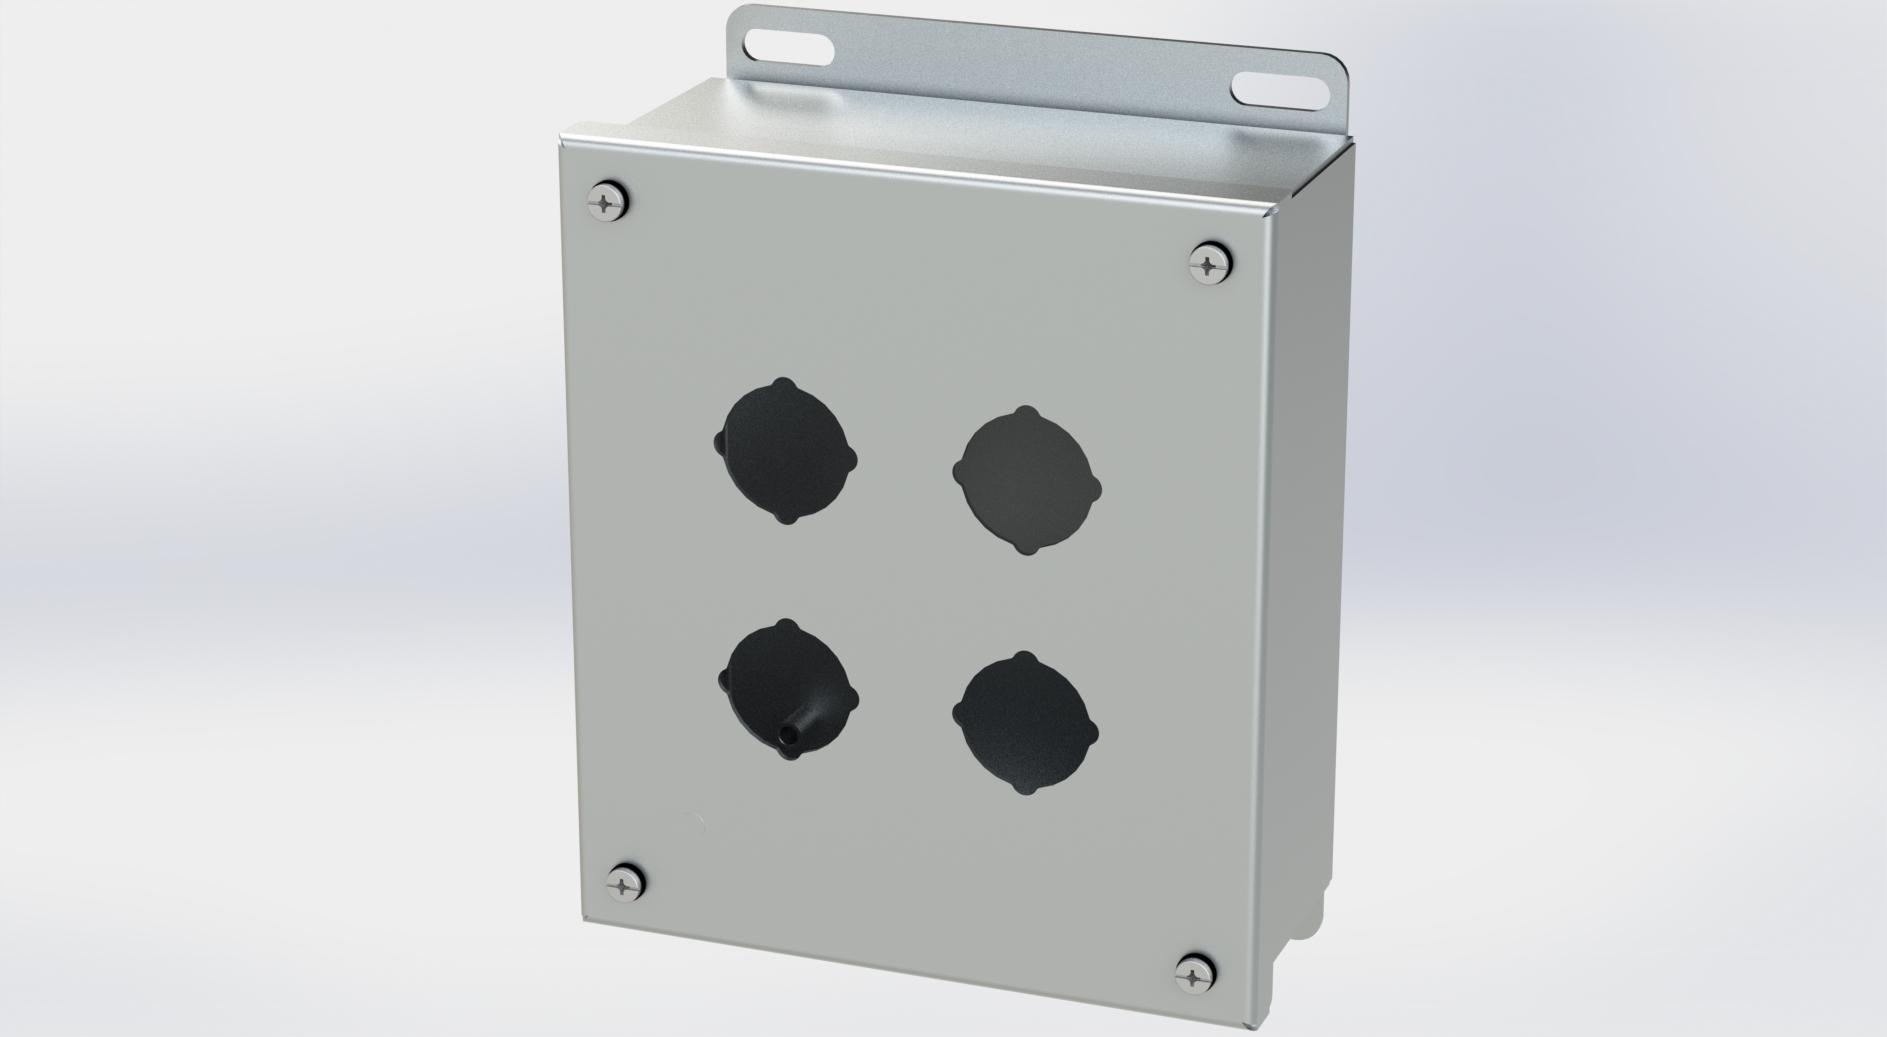 Saginaw Control SCE-4SPBSS6 S.S. PB Enclosure, Height:7.25", Width:6.25", Depth:3.00", #4 brushed finish on all exterior surfaces.